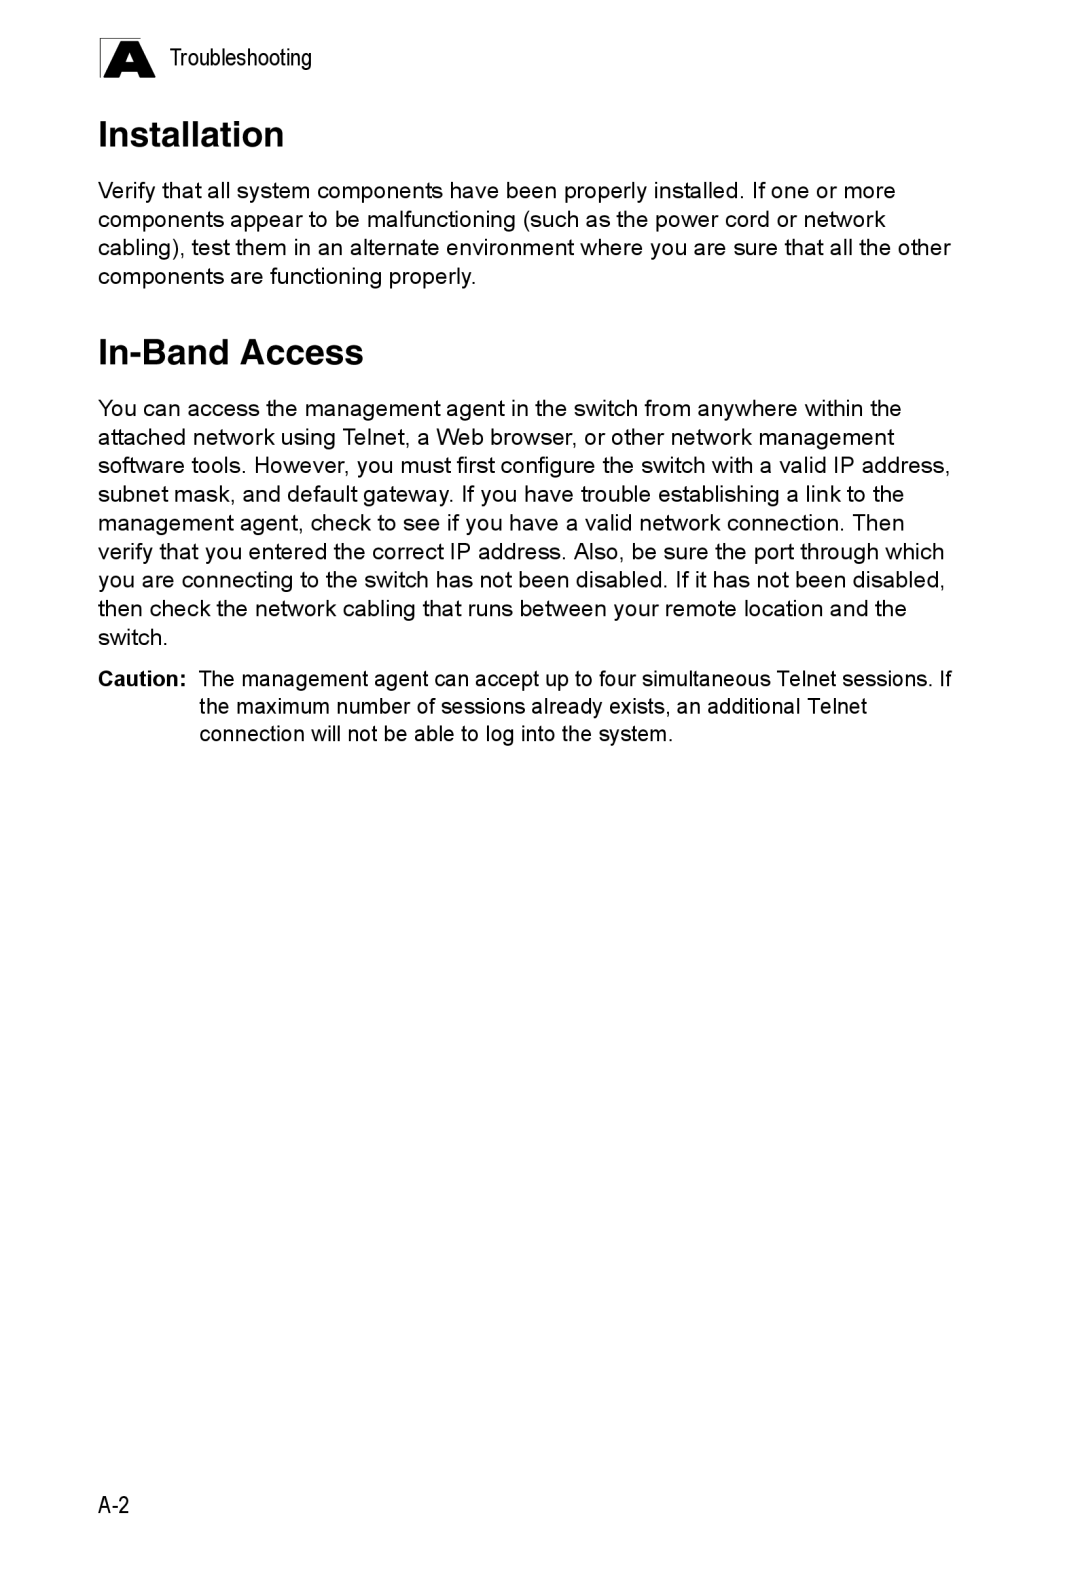 SMC Networks SMC8126PL2-F manual Installation, In-BandAccess, A Troubleshooting 